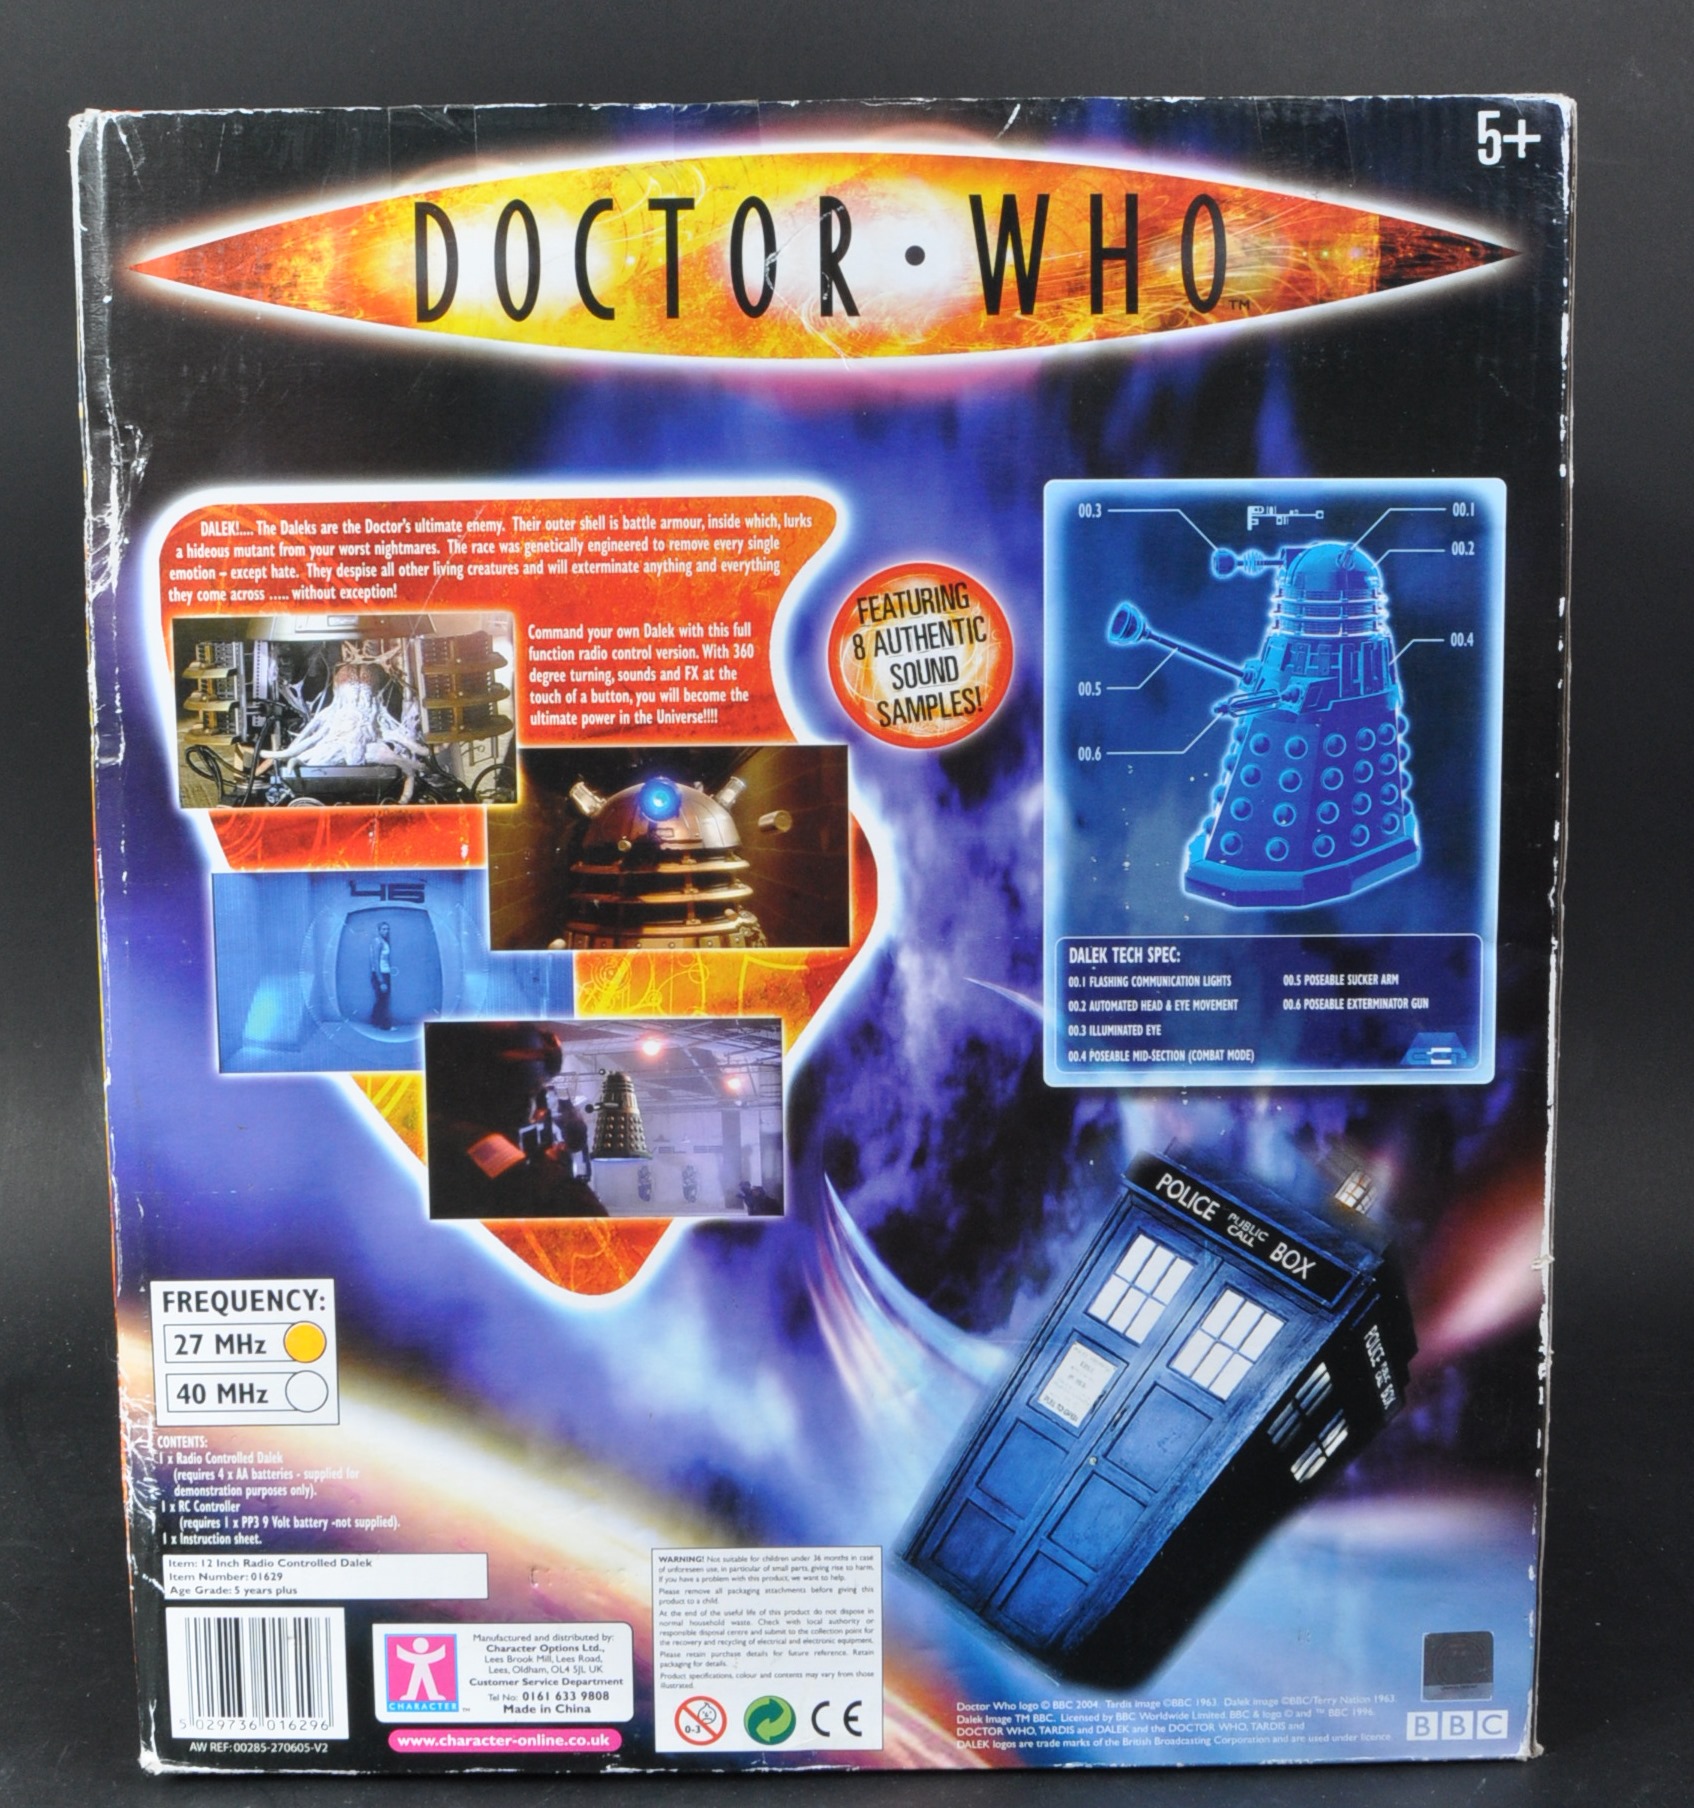 DOCTOR WHO - CHARACTER - LARGE SCALE RADIO CONTROLLED DALEK - Image 6 of 6